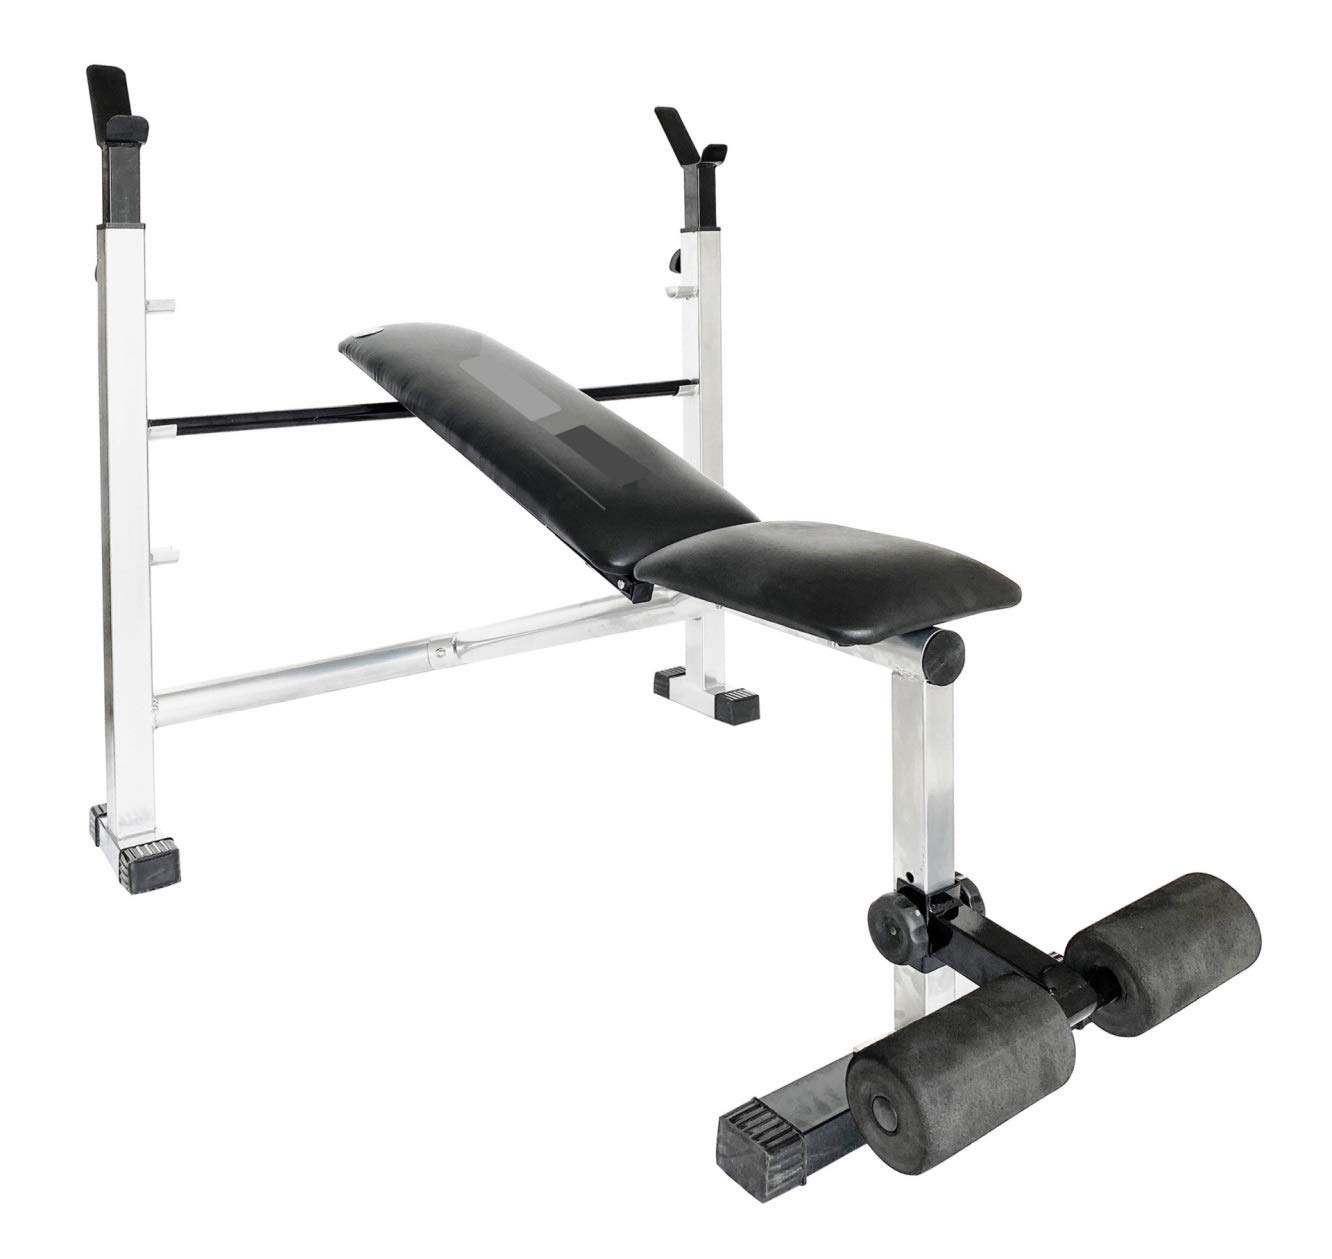 National Bodyline Weight Bench- a home gym machine for weight training